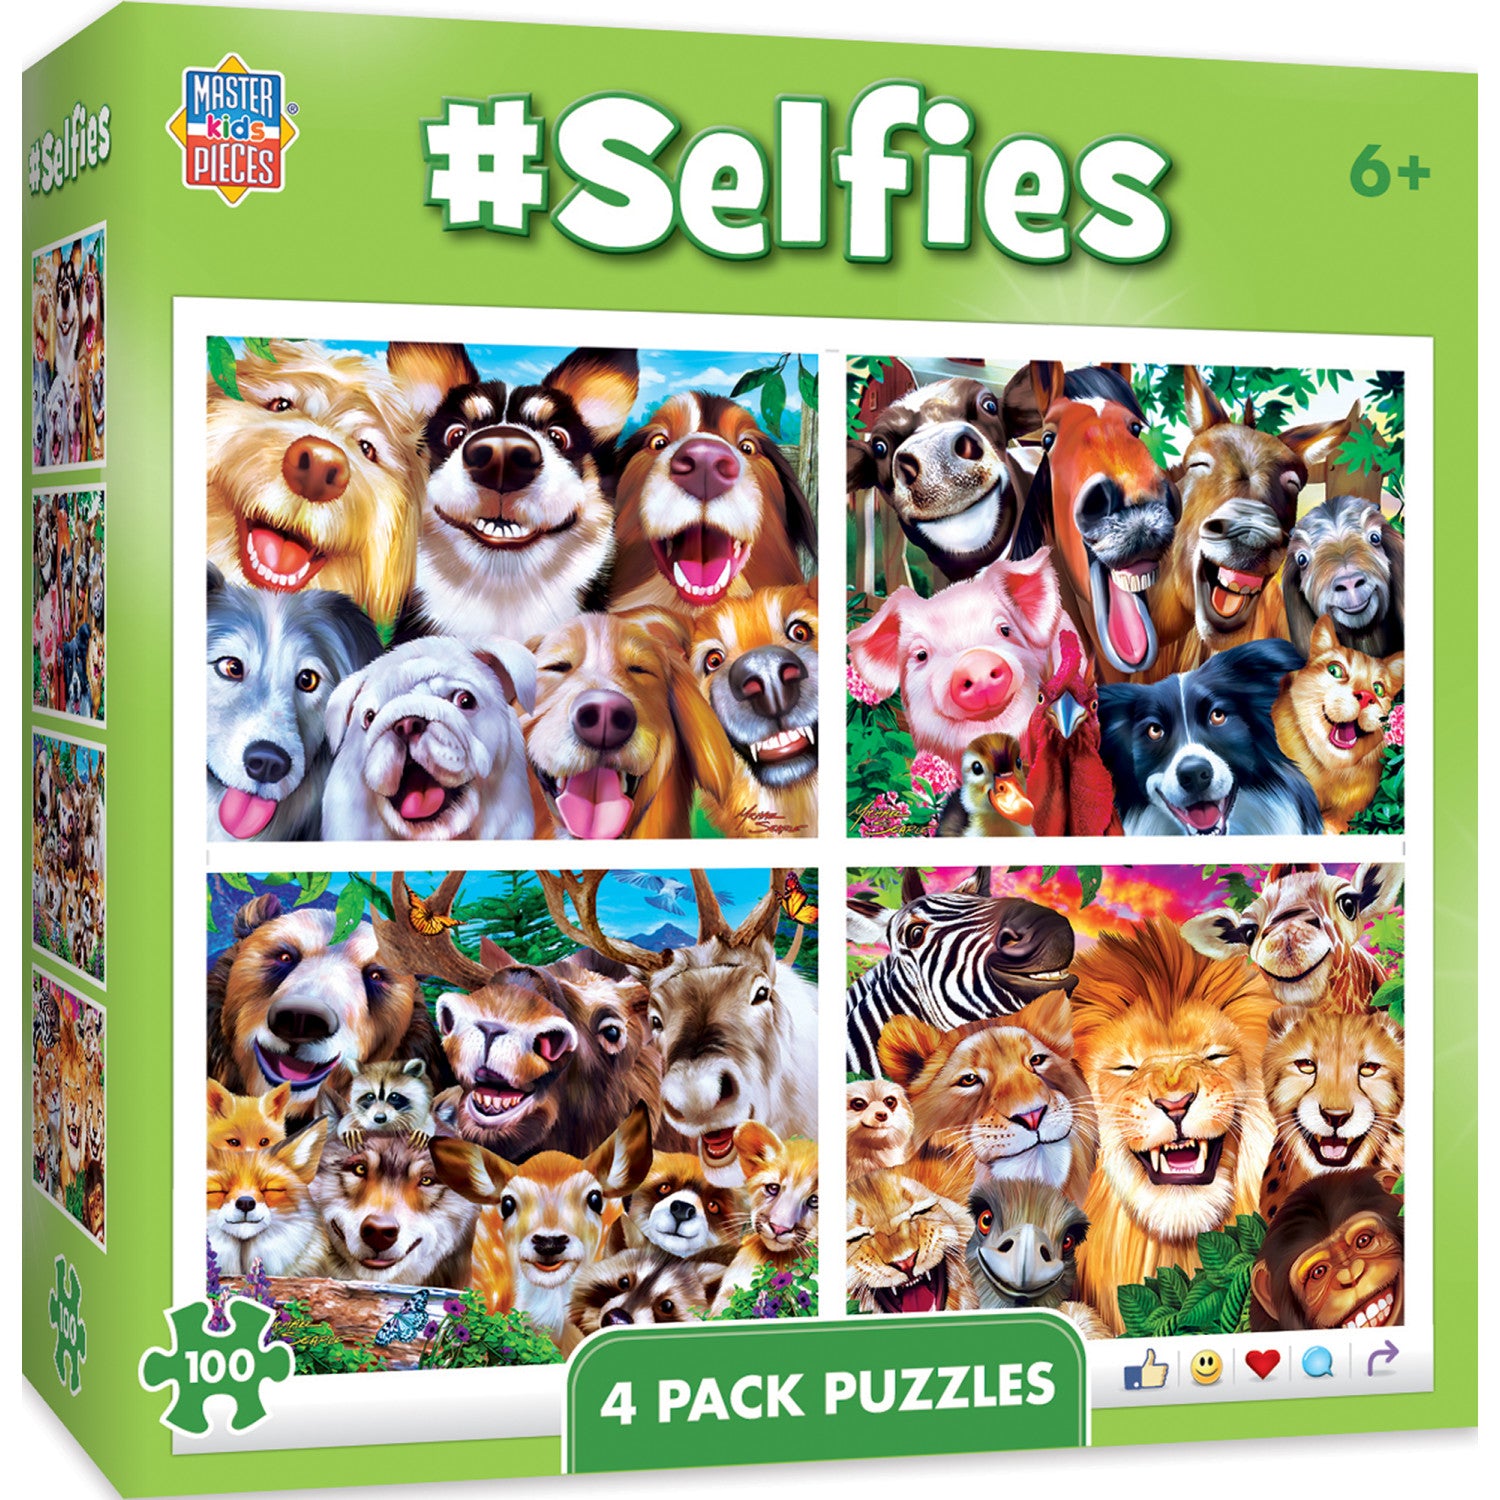 Selfies 100 Piece Jigsaw Puzzles 4-Pack